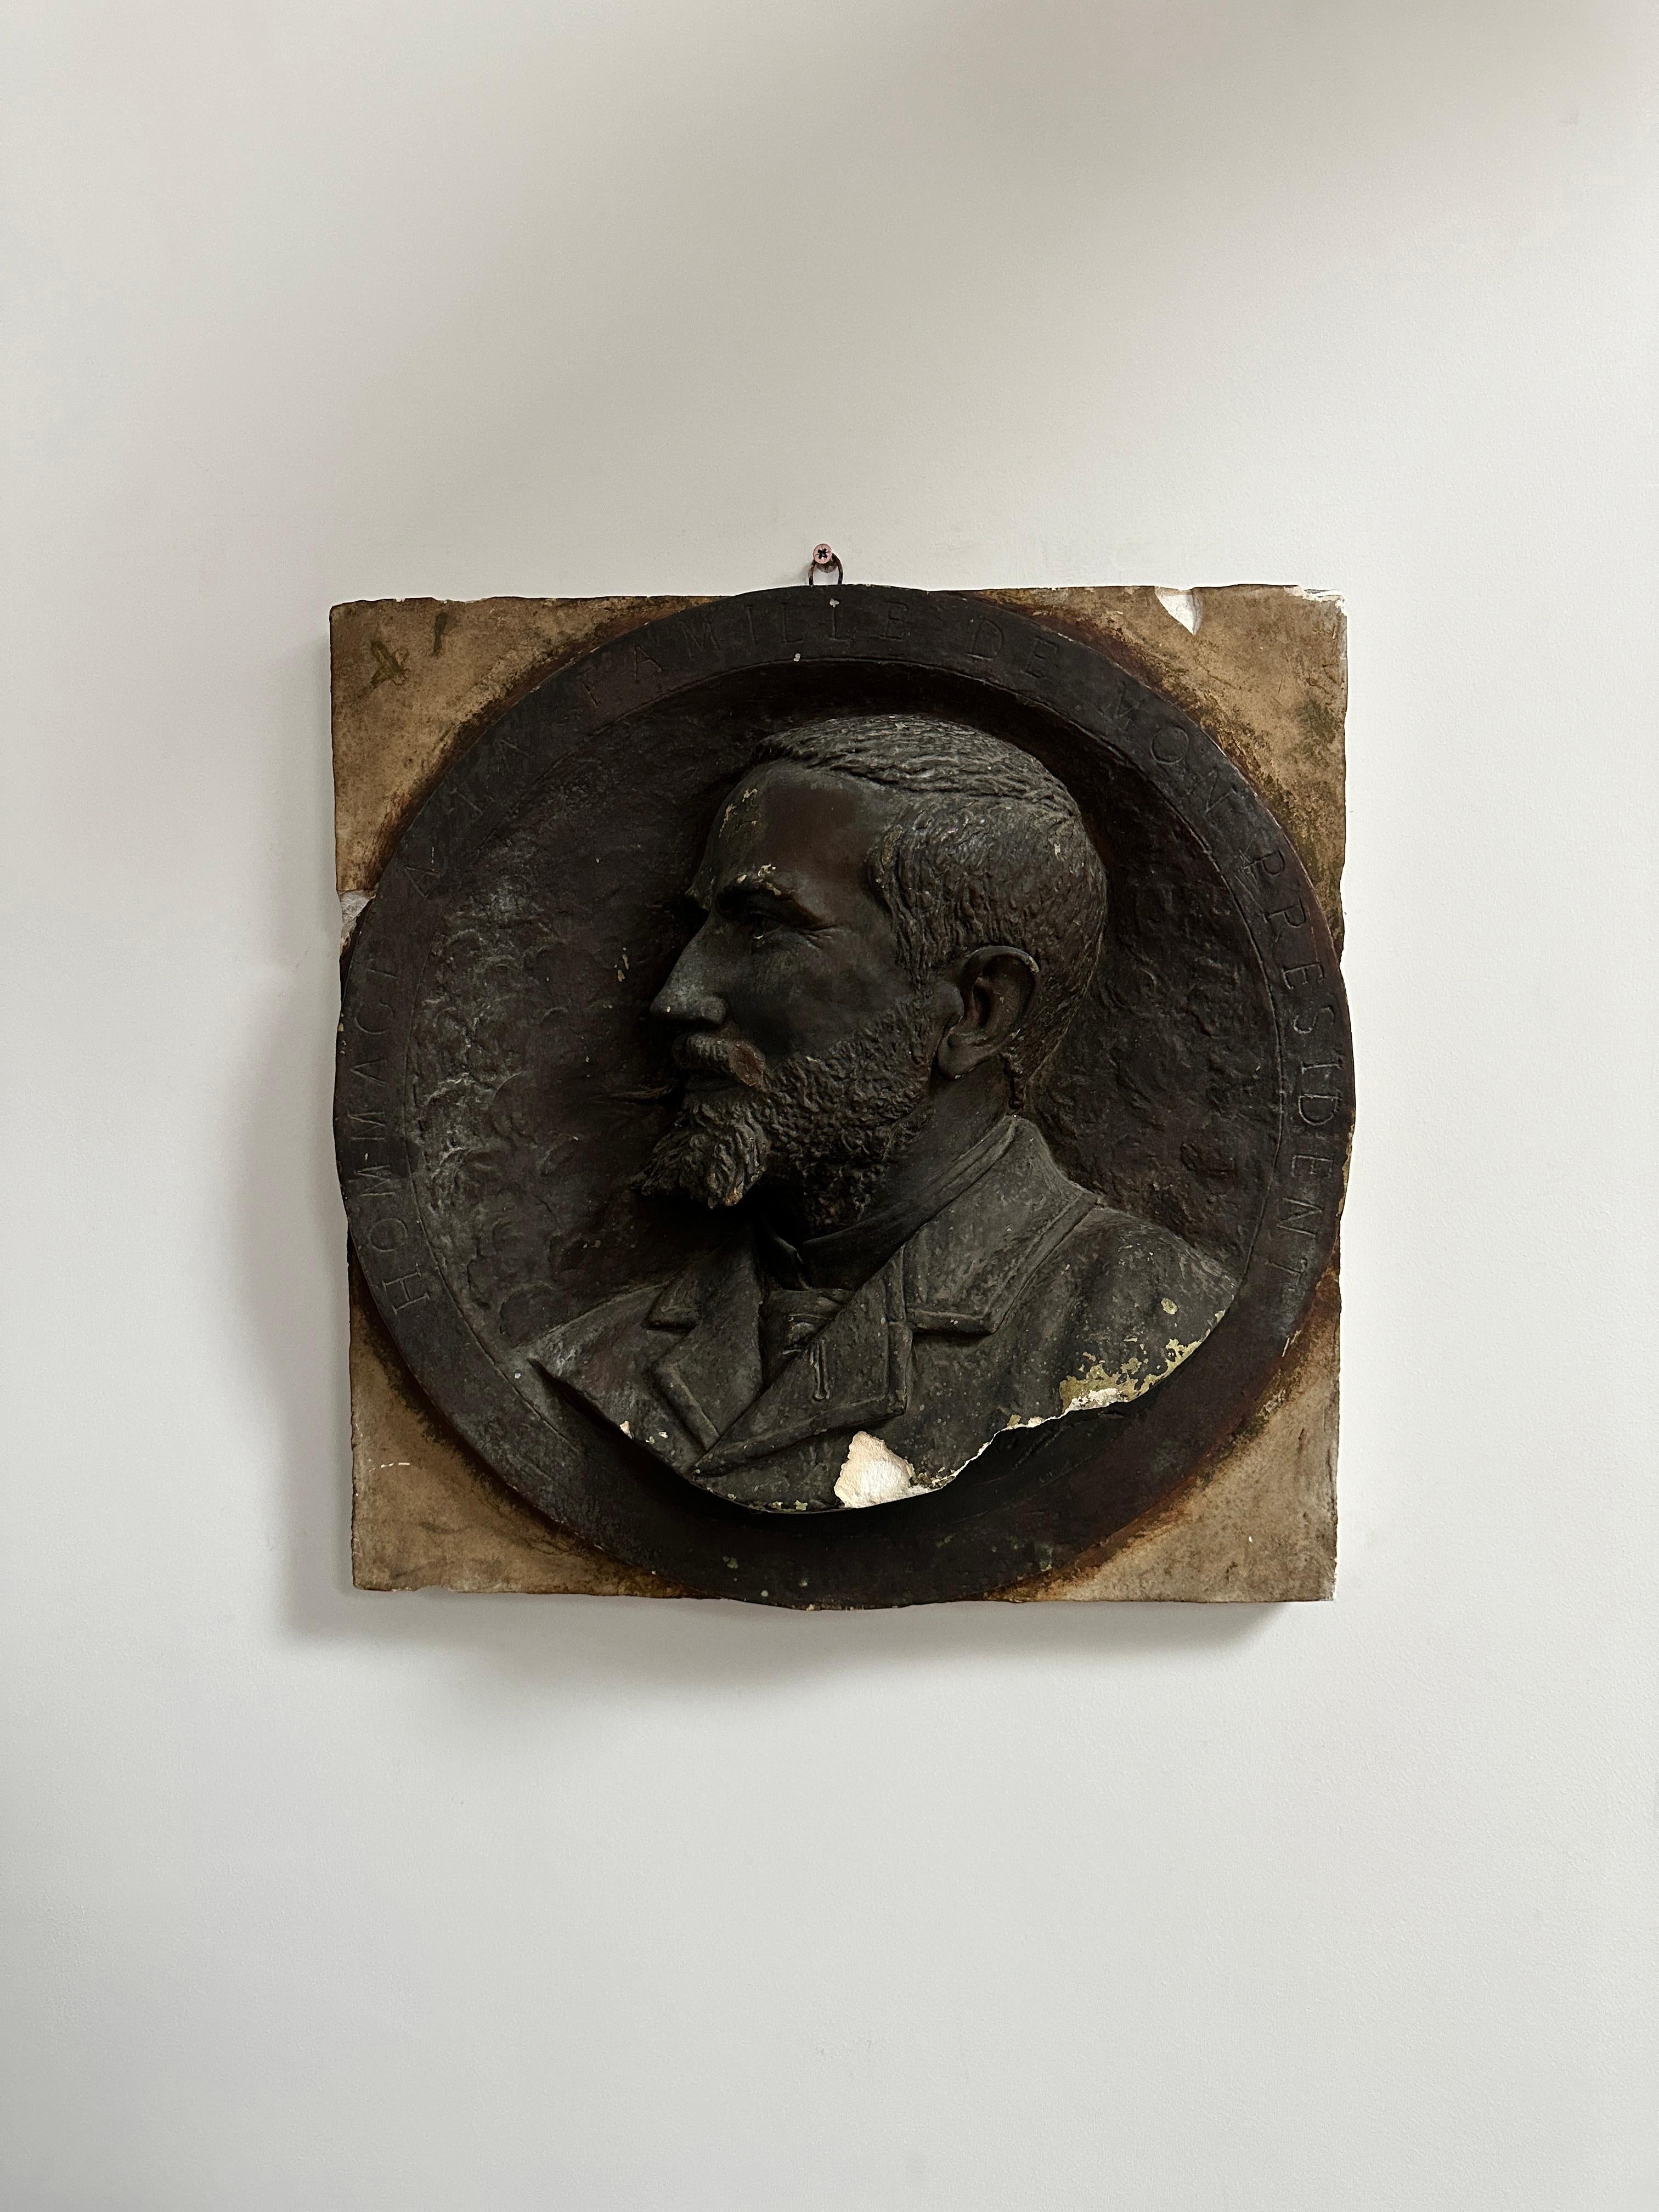 - A 19th Century plaster wall bust of a bearded man with inscription, England circa 1890. 
- The figure has a real presence encompassing the most remarkable craftsmanship, wonderful detail and age related wear across the original plaster and